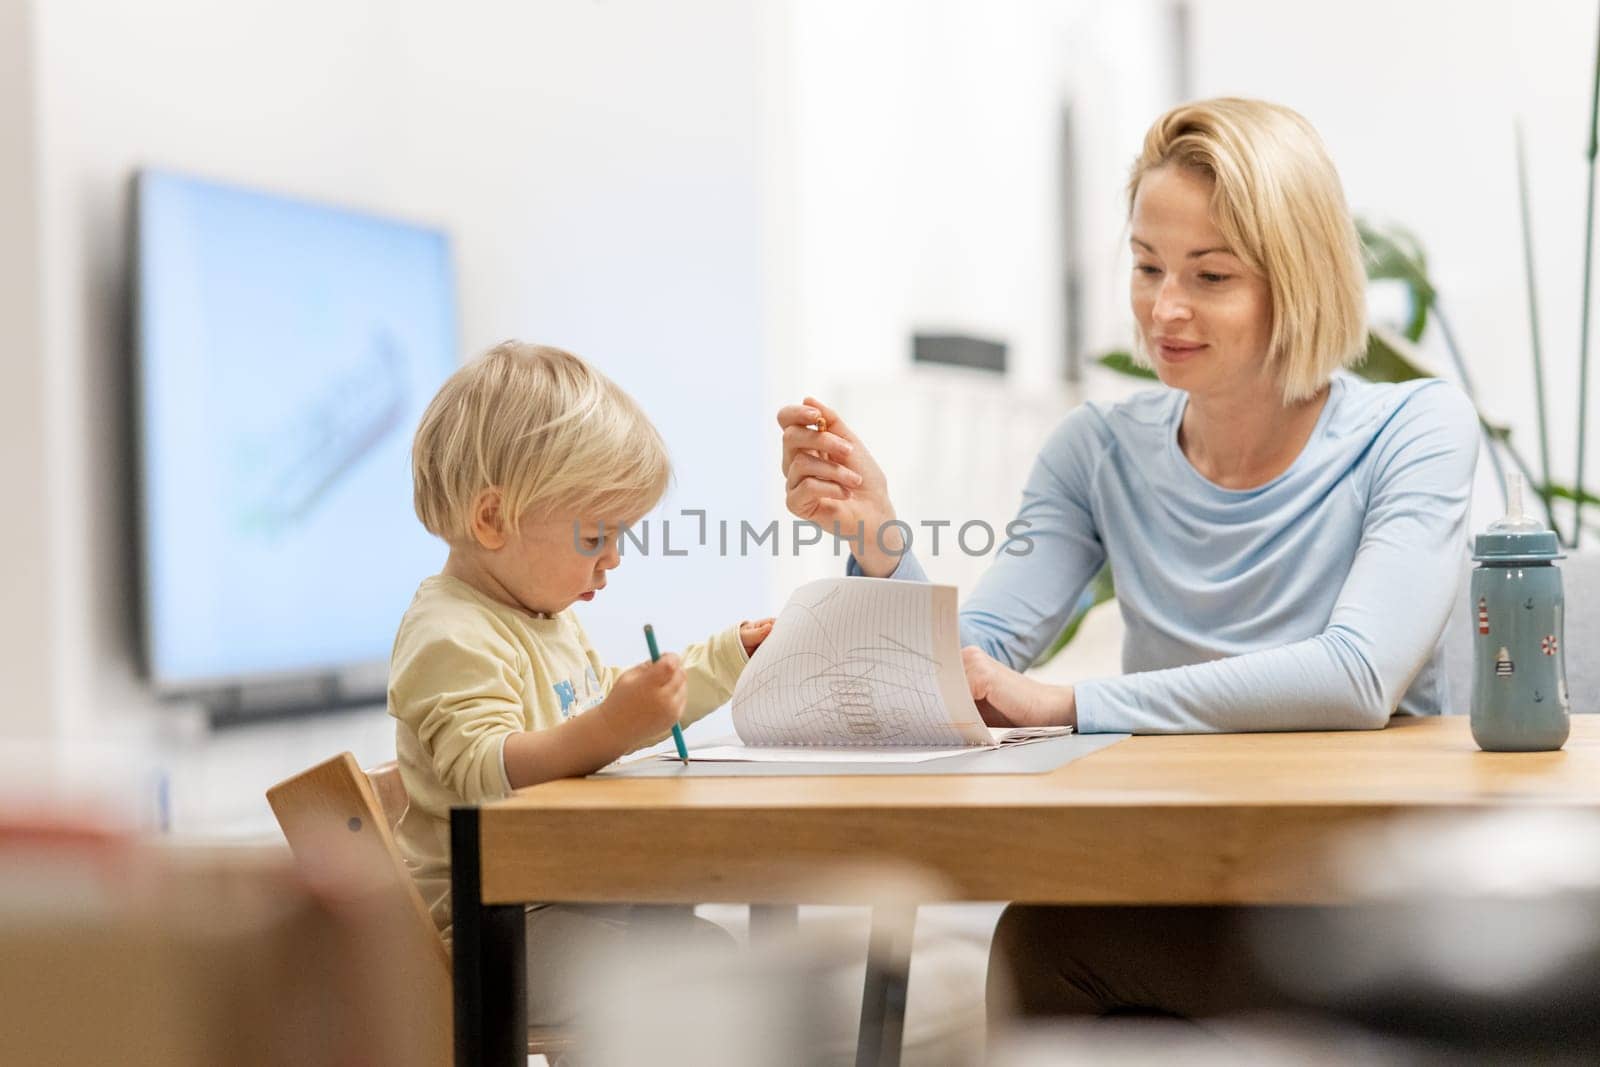 Caring young Caucasian mother and small son drawing painting in notebook at home together. Loving mom or nanny having fun learning and playing with her little 1,5 year old infant baby boy child